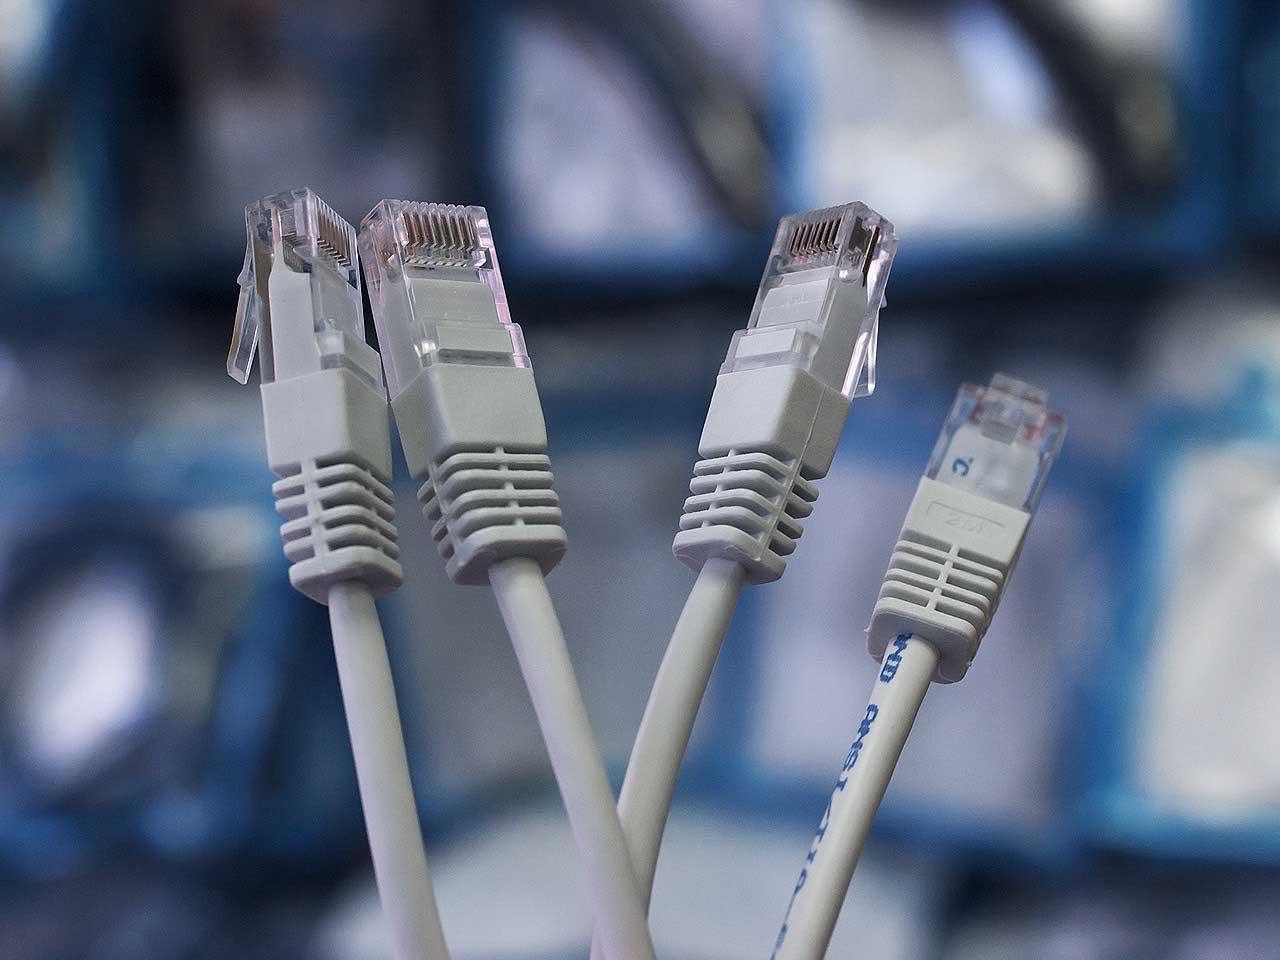 Using the fiber optic connection